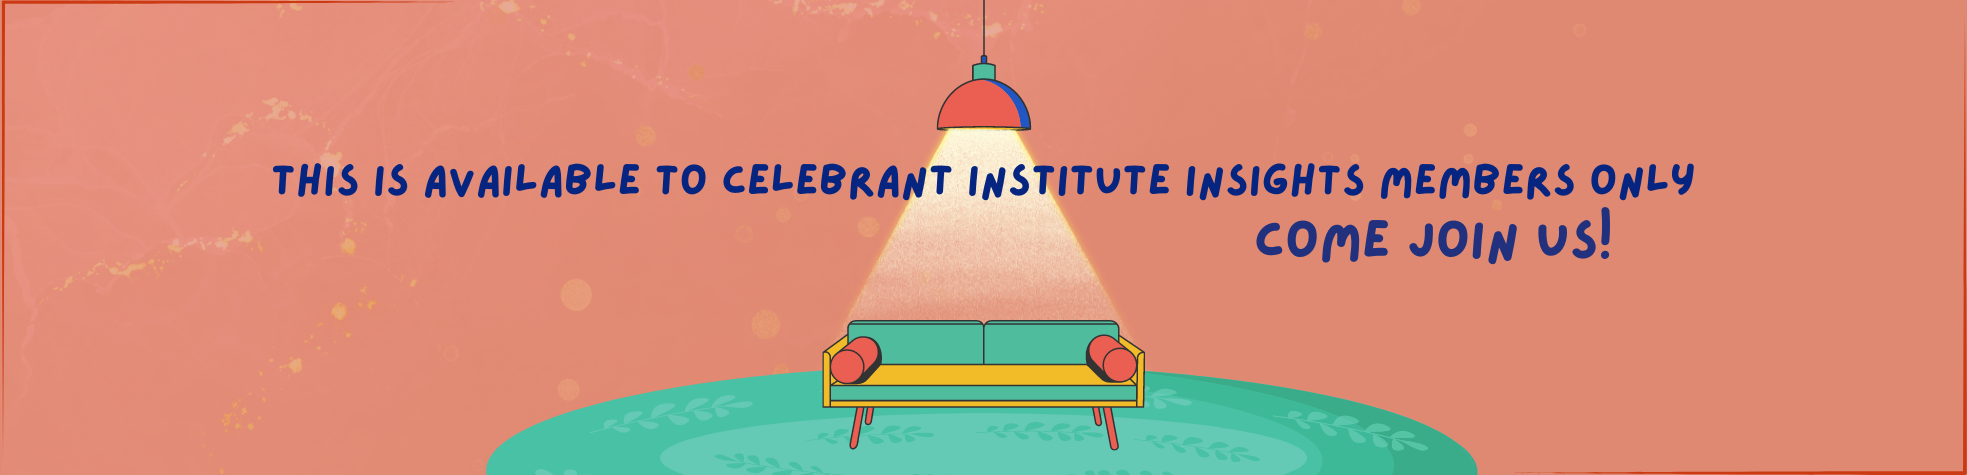 Insights Level members of the Celebrant Institute only